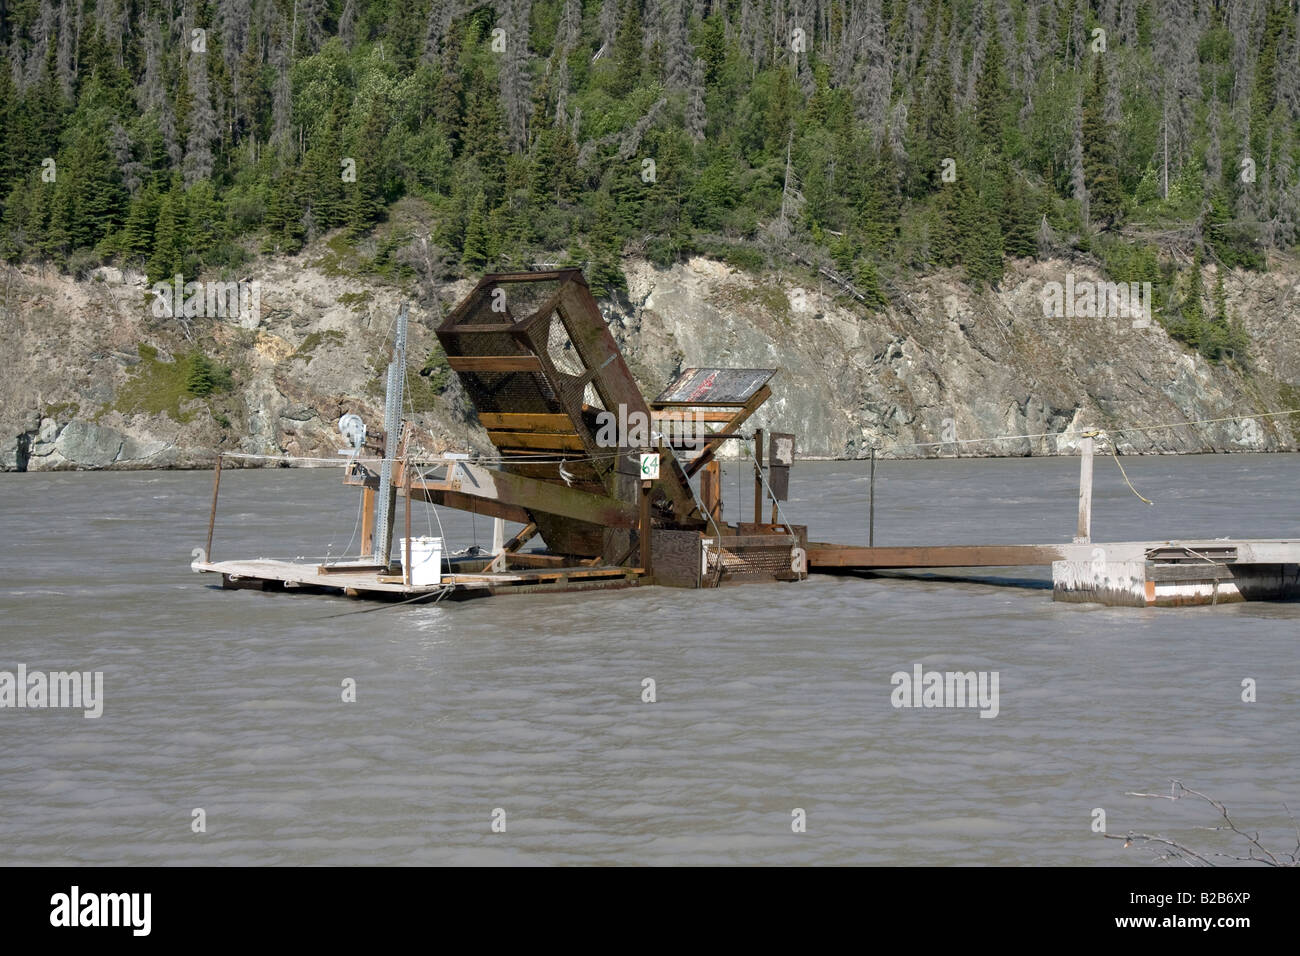 Fishing wheel, for automated catching of salmon in Copper River